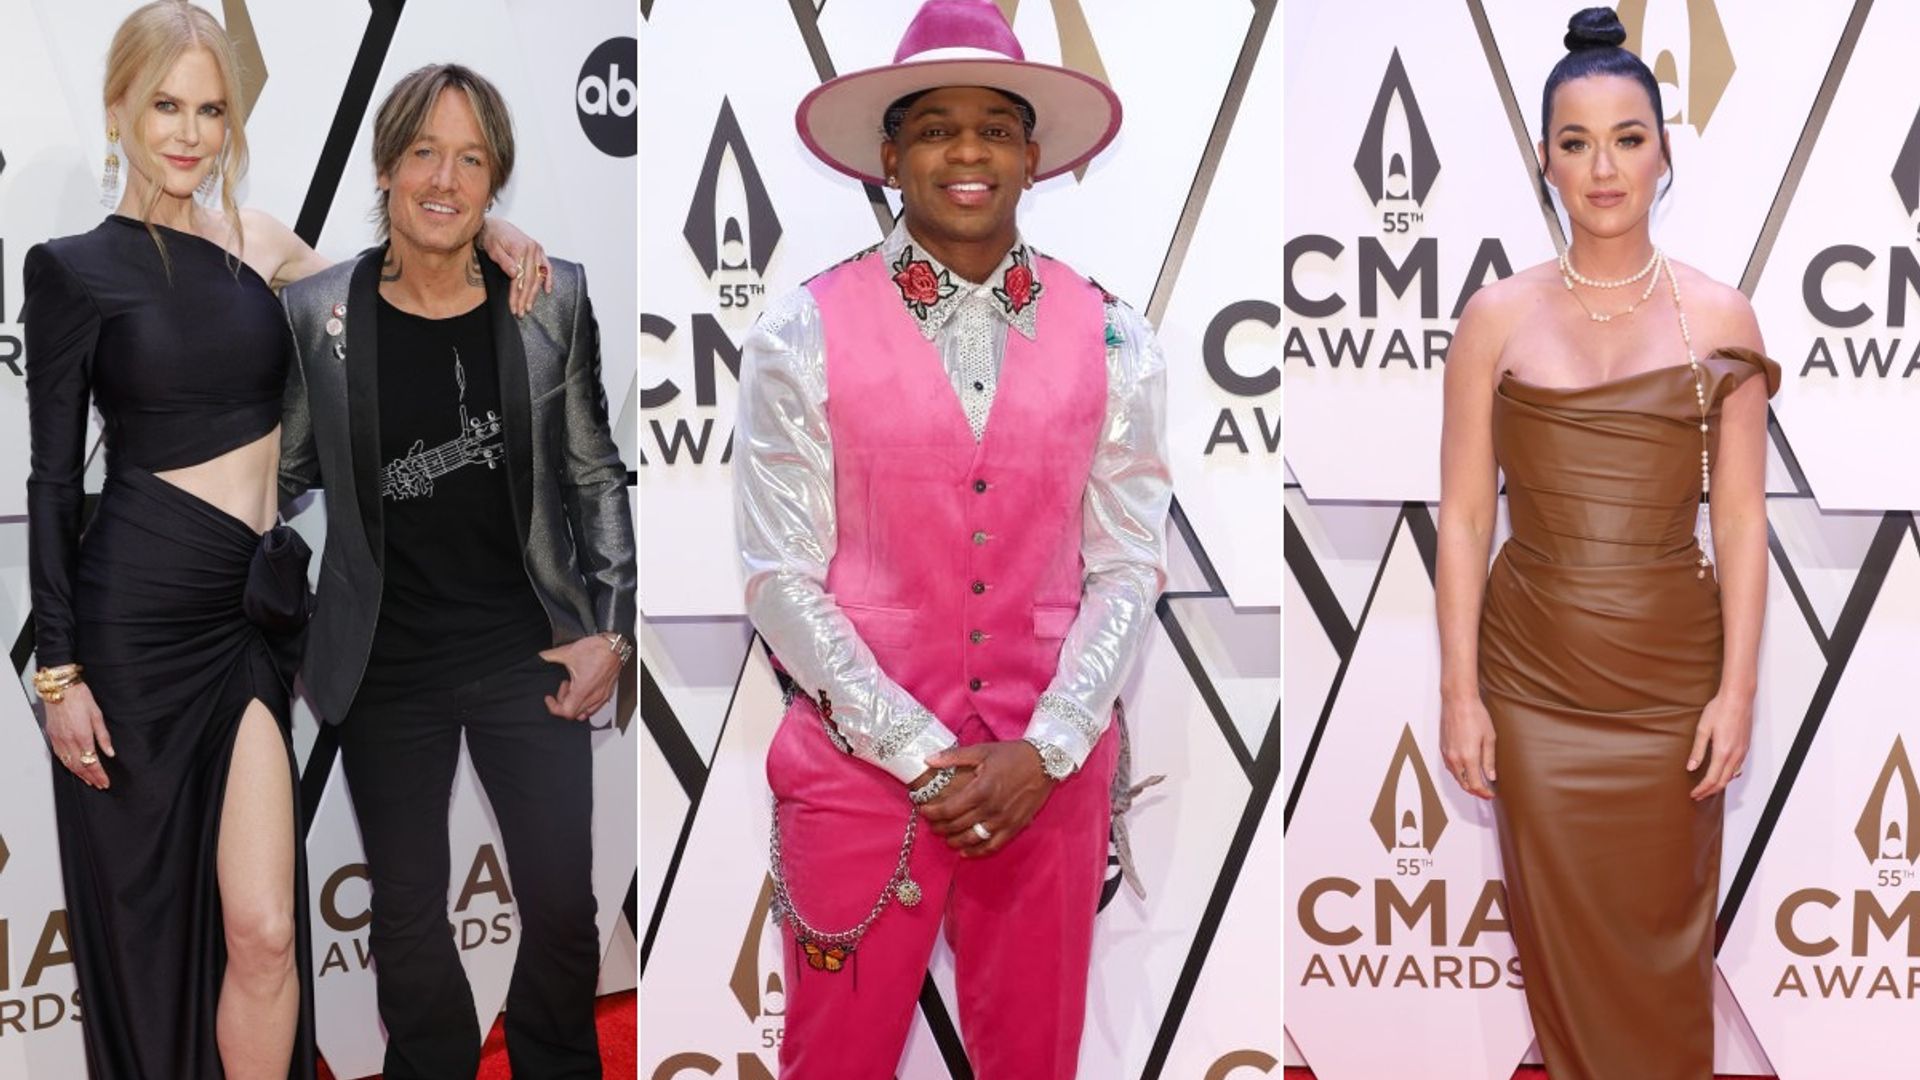 CMA Awards 2021: Nicole Kidman and DWTS' Jimmie Allen lead the fashion pack